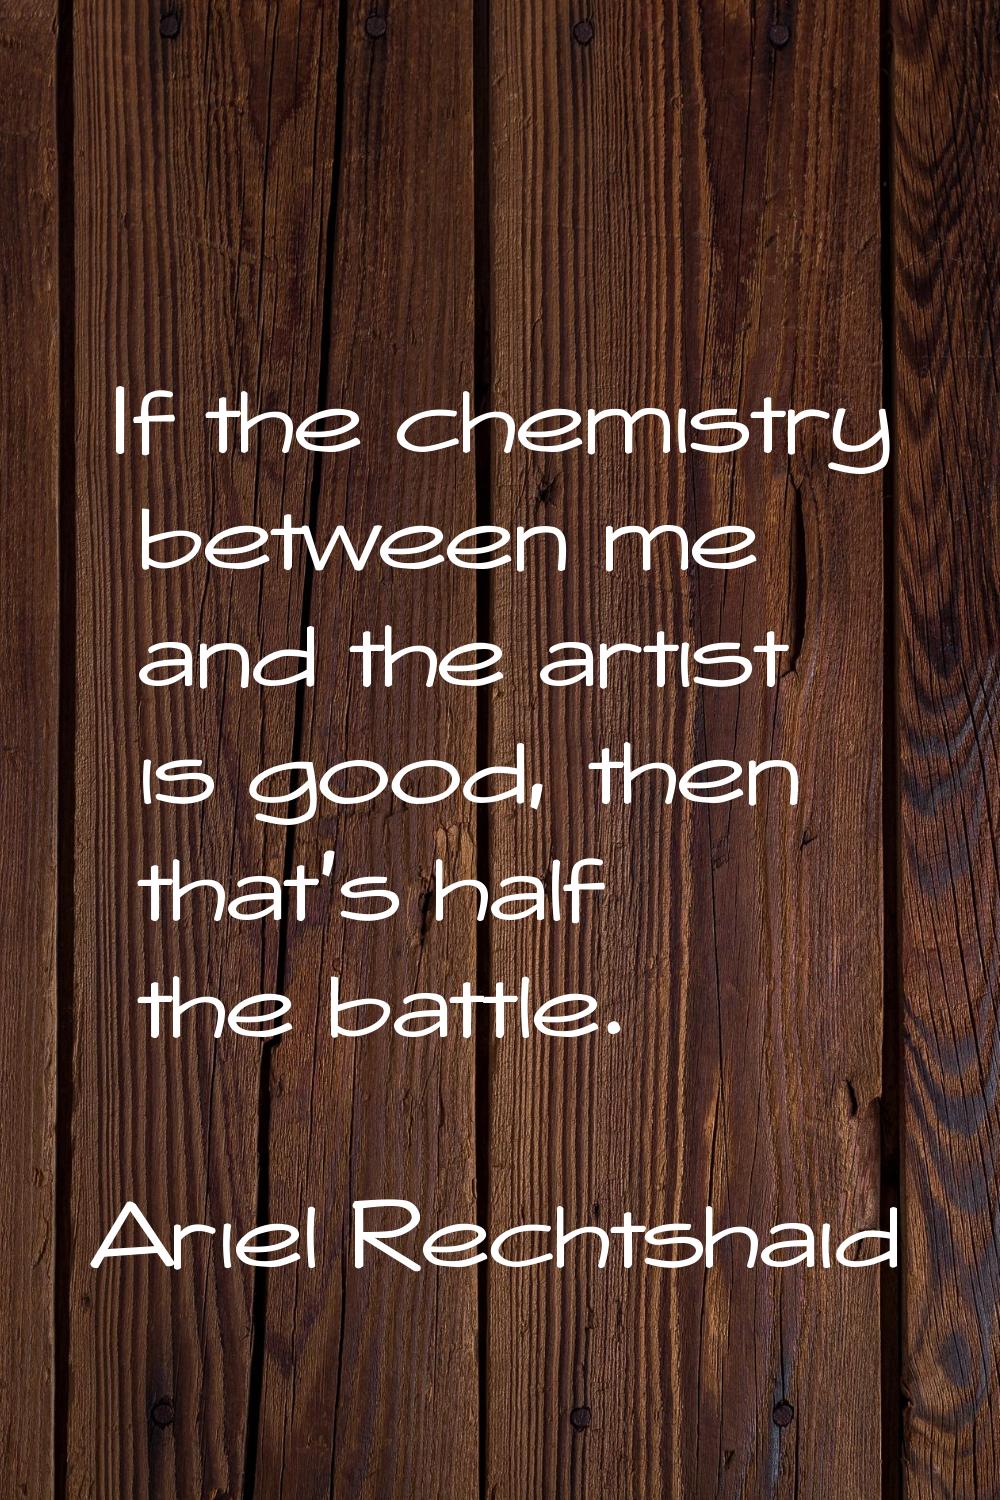 If the chemistry between me and the artist is good, then that's half the battle.